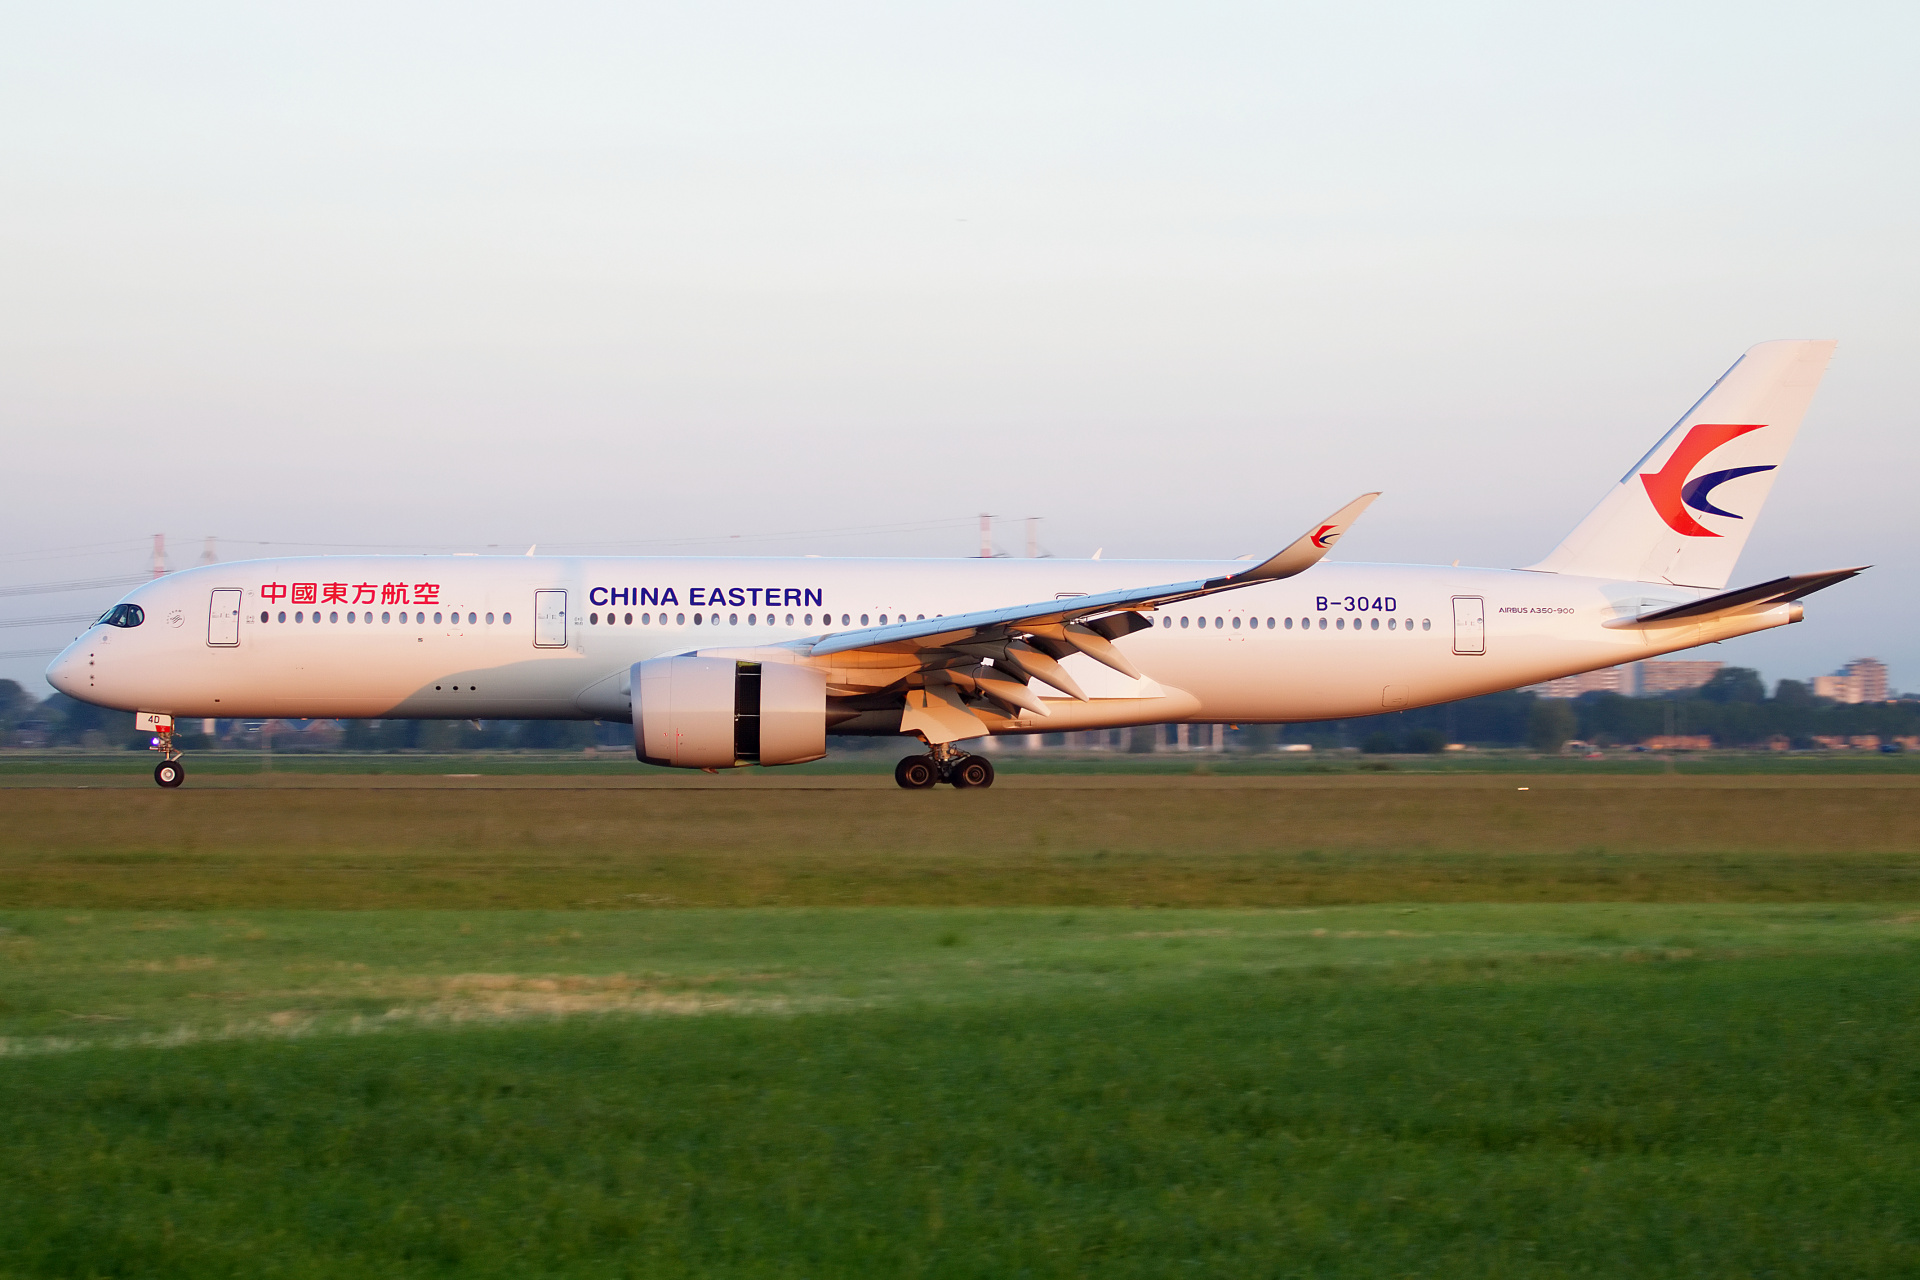 B-304D, China Eastern Airlines (Samoloty » Spotting na Schiphol » Airbus A350-900)